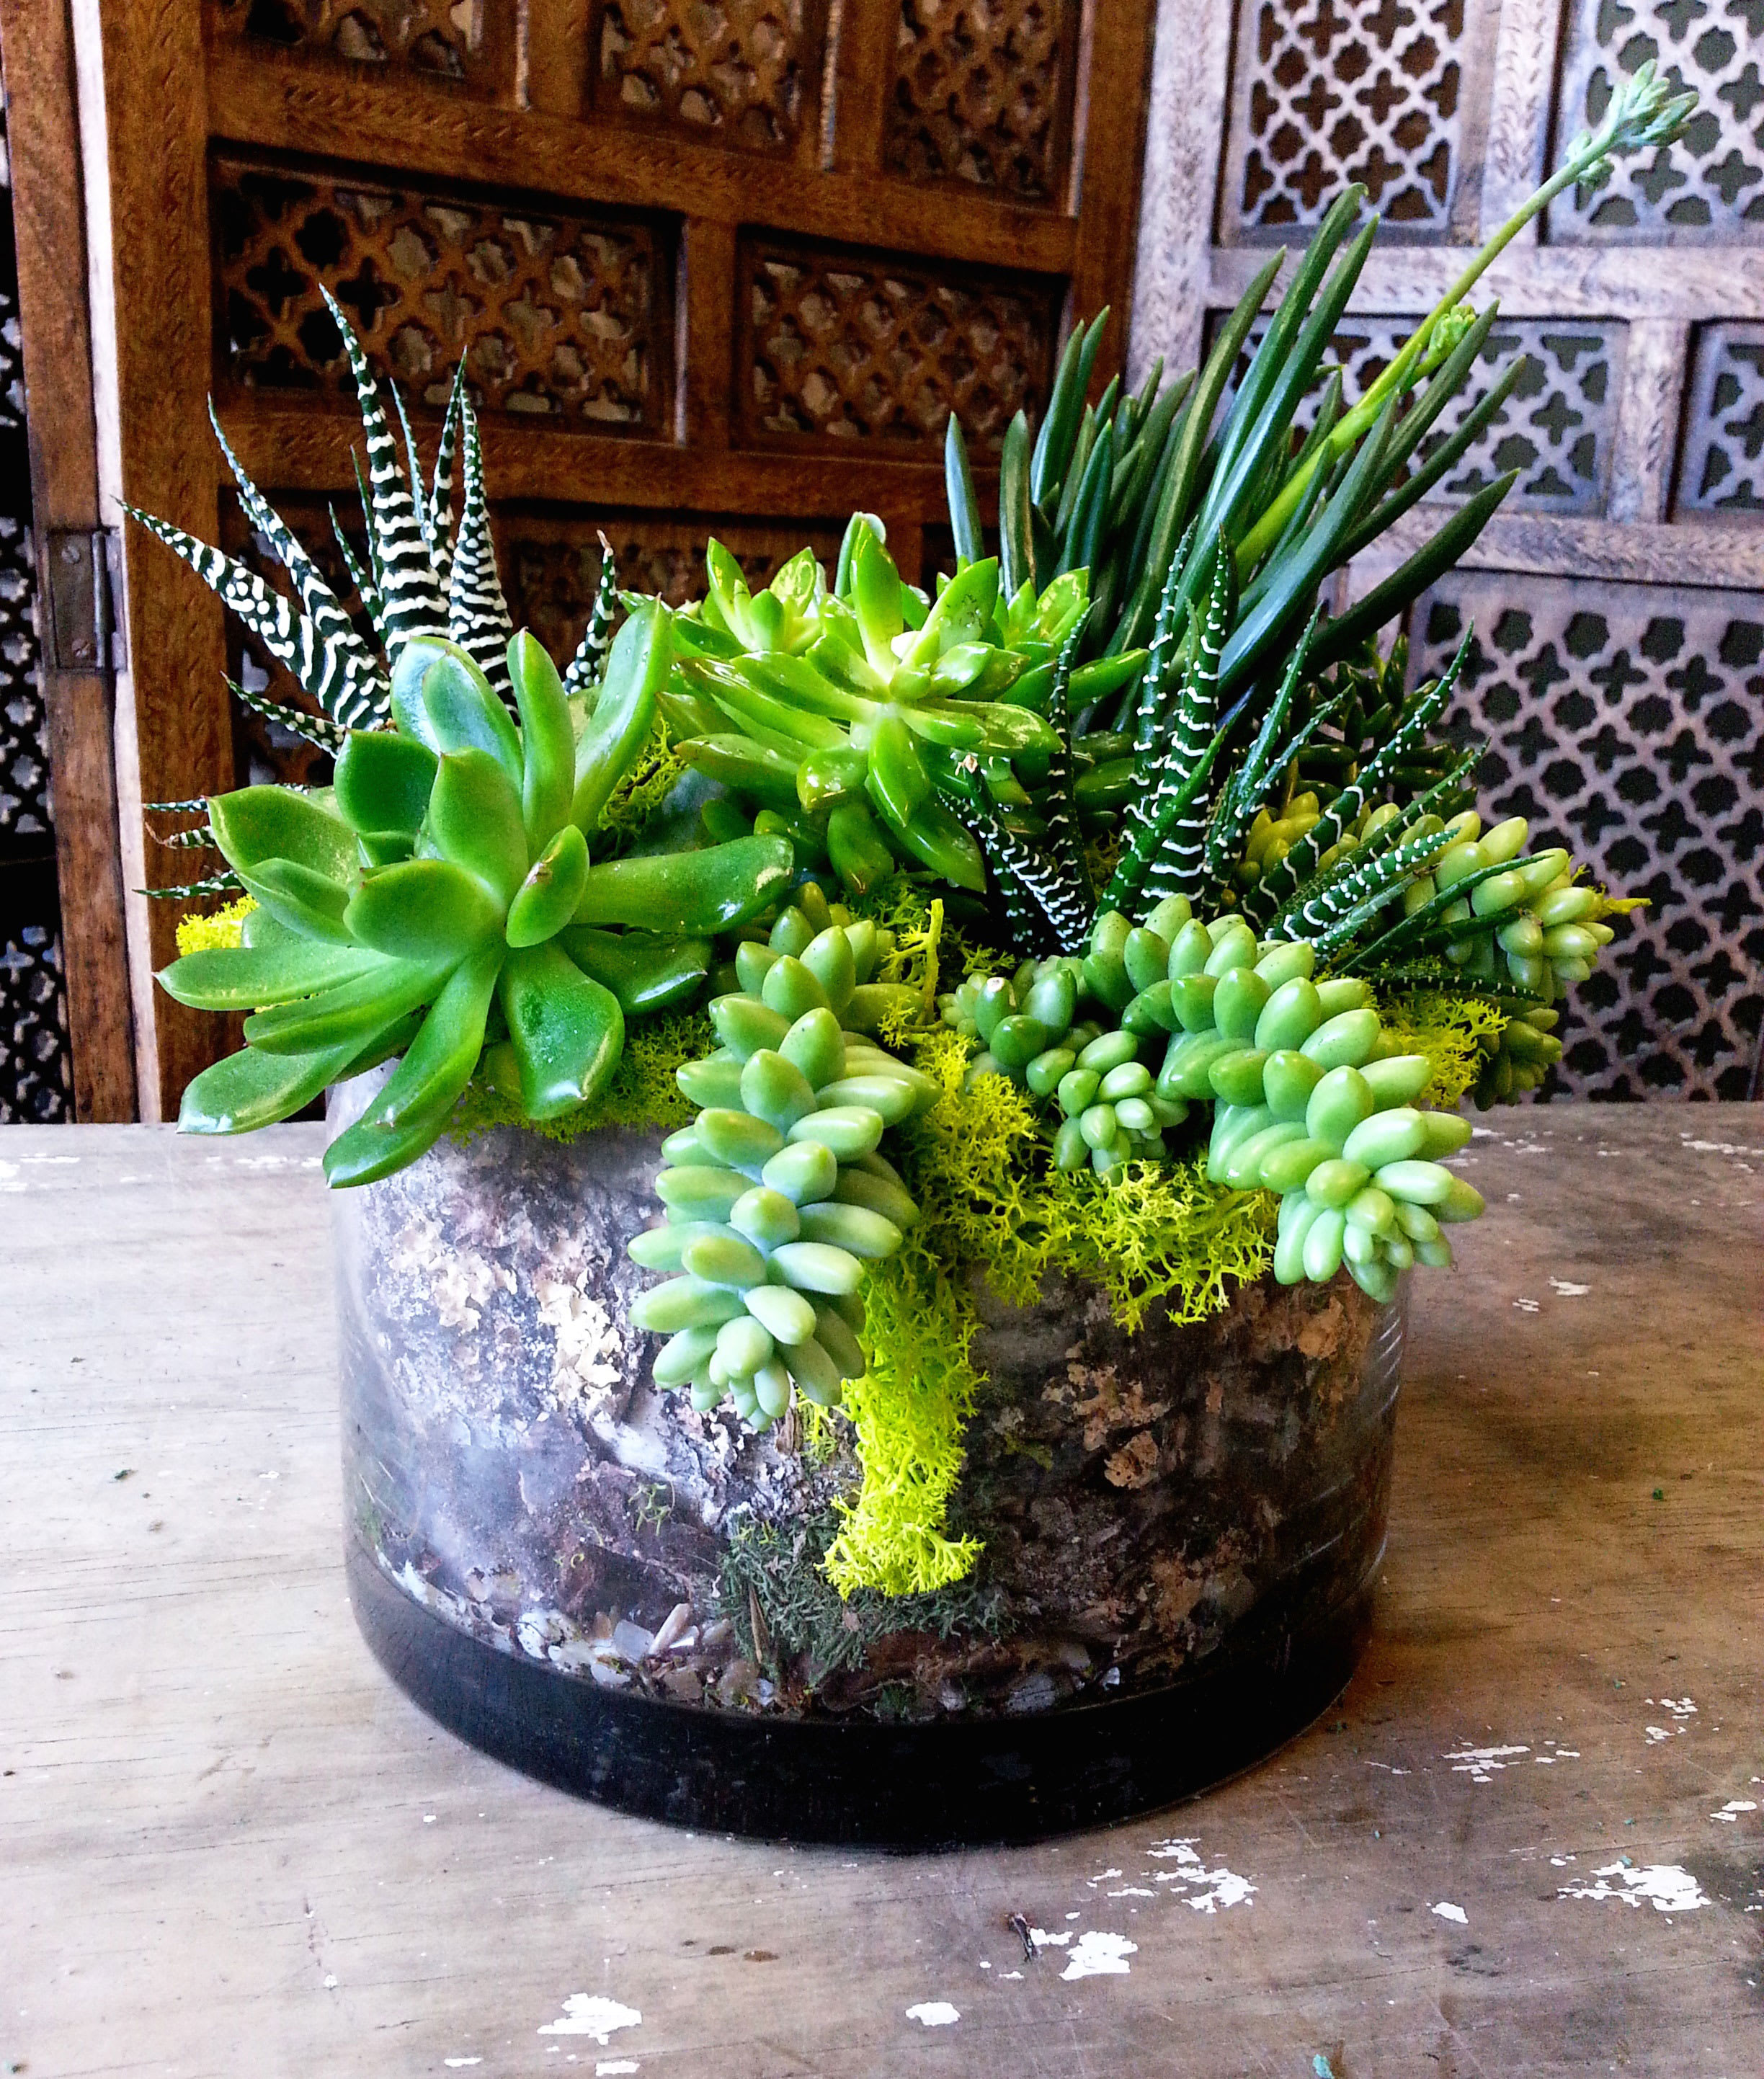 Organic Garden - Beautiful mix of succulent plants in a blown glass vessel with mosses, barks...